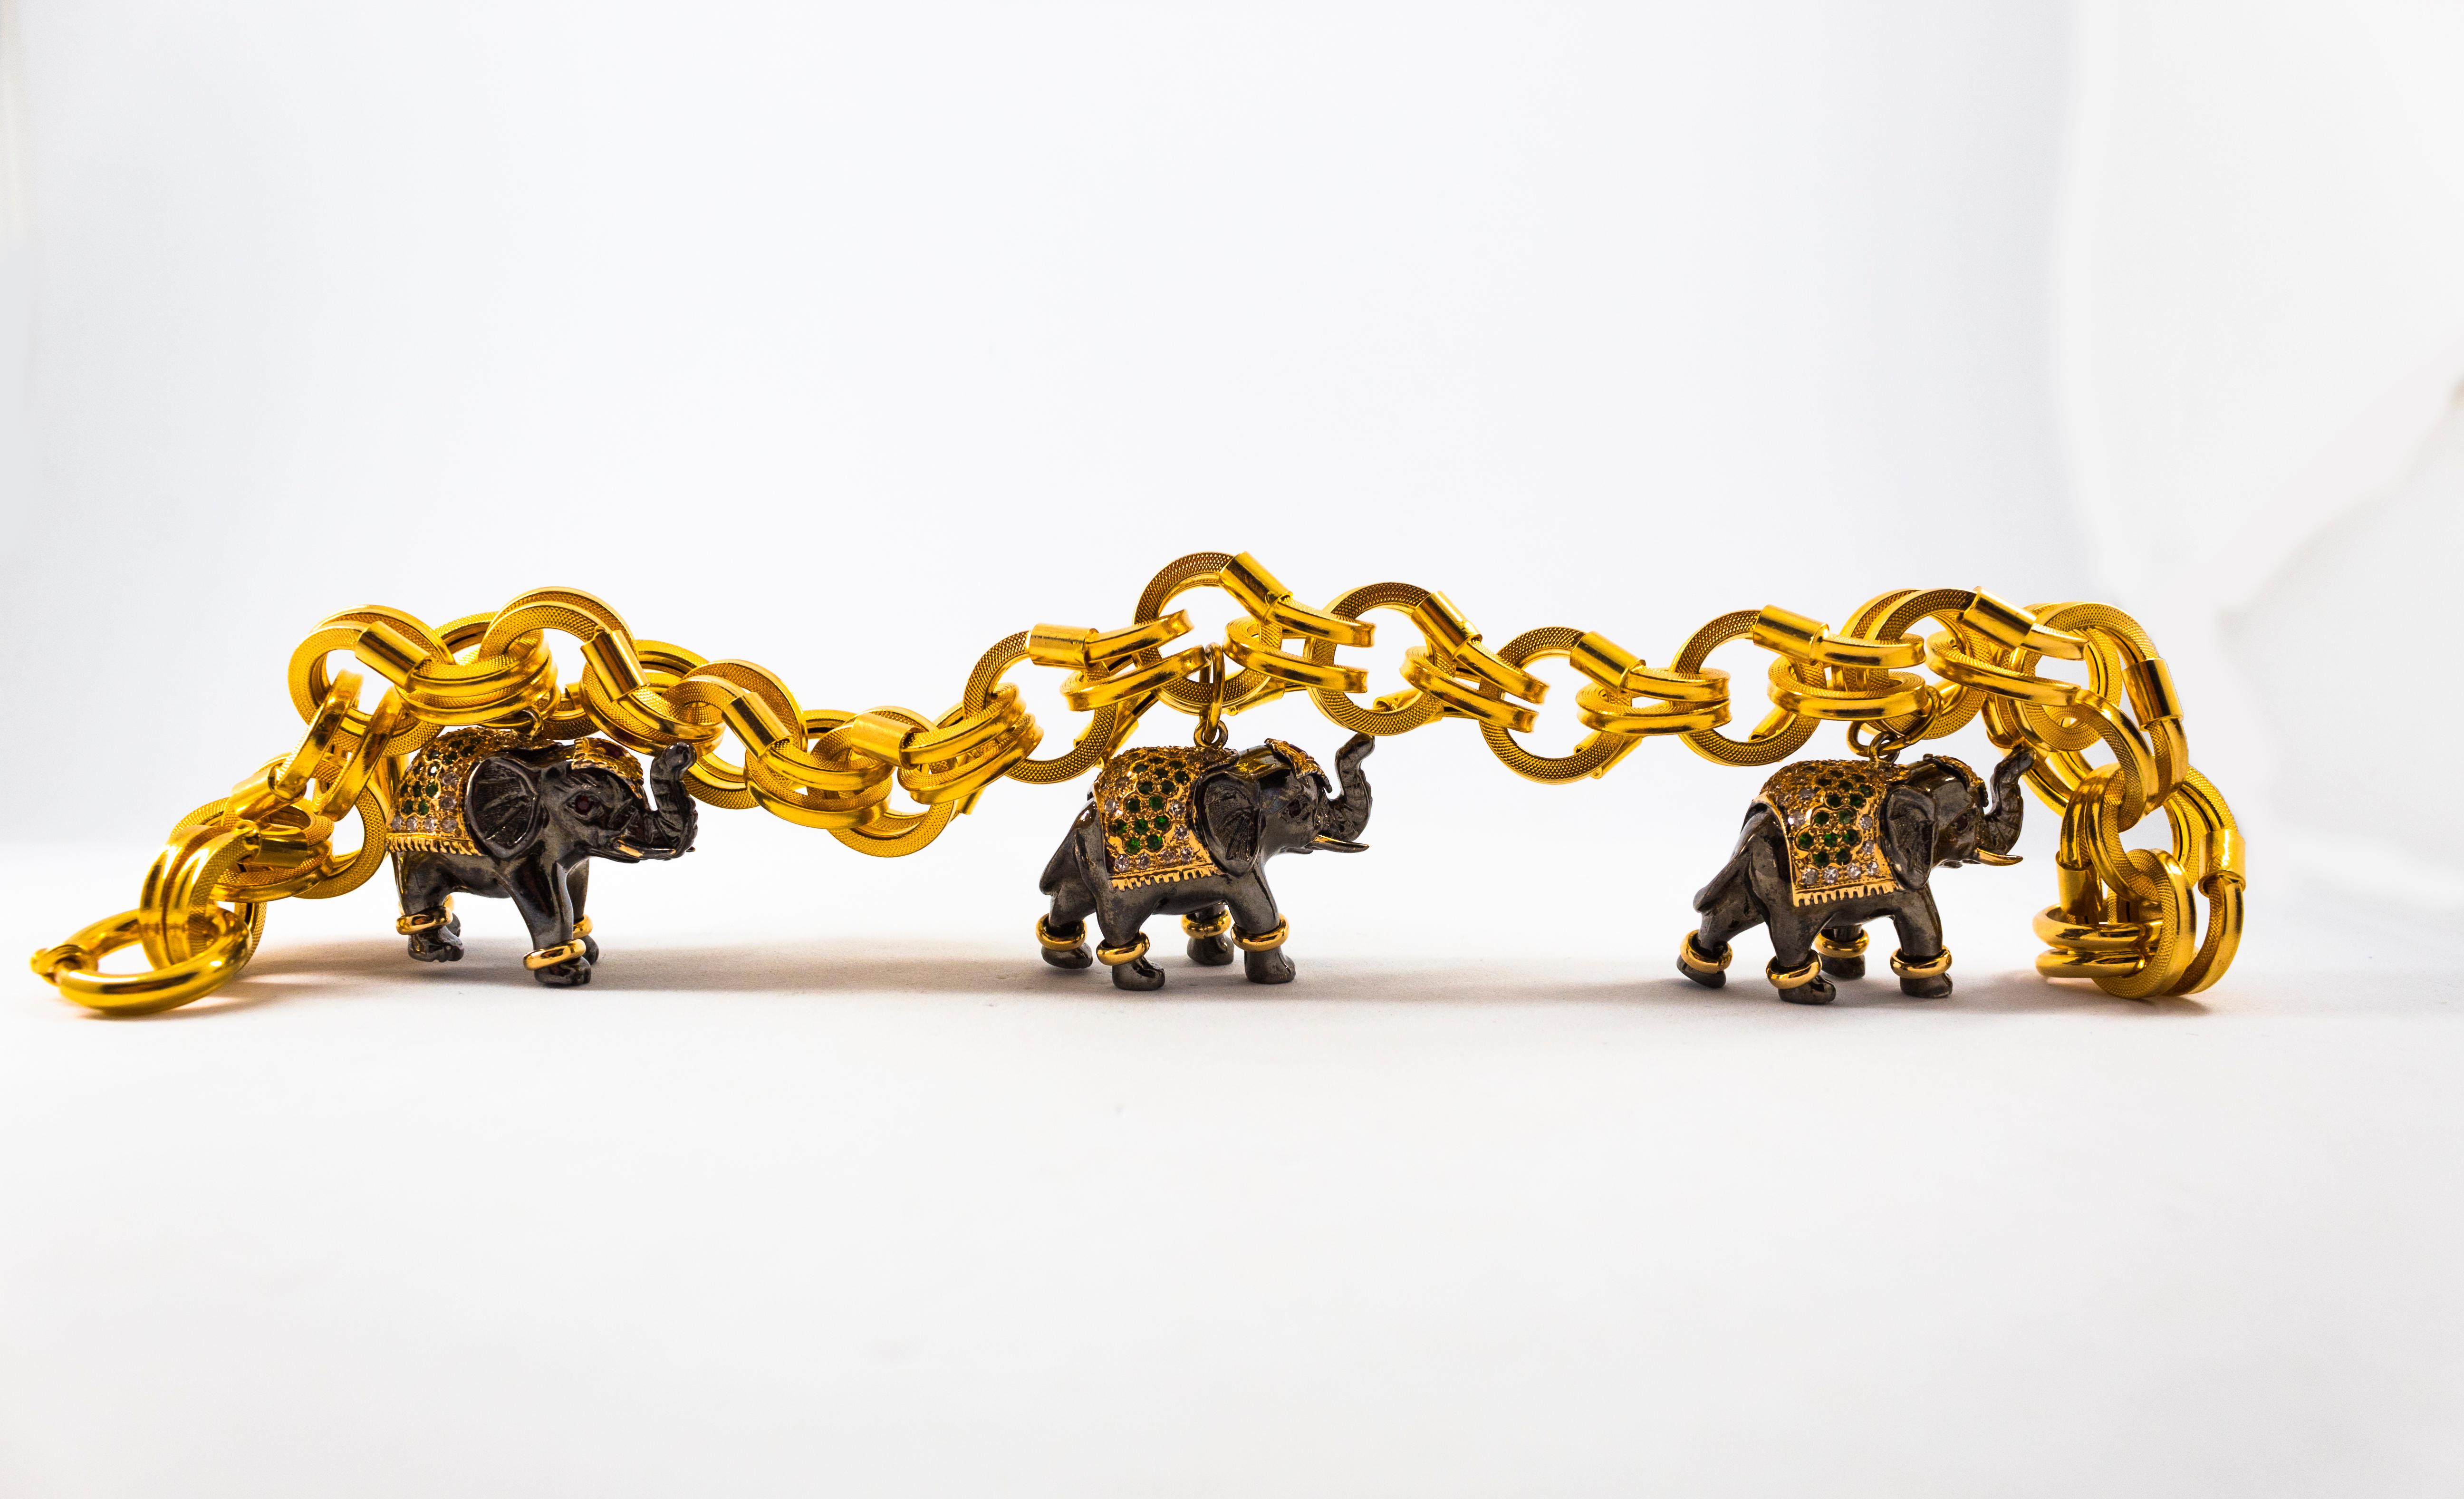 The Bracelet is made of 18K Yellow Gold.
The Weight of the Bracelet is 36.10g.
The Elephants are made of 14K Yellow Gold and Sterling Silver.
This Bracelet has 1.02 Carats of White Diamonds.
This Bracelet has 1.20 Carats of Rubies and